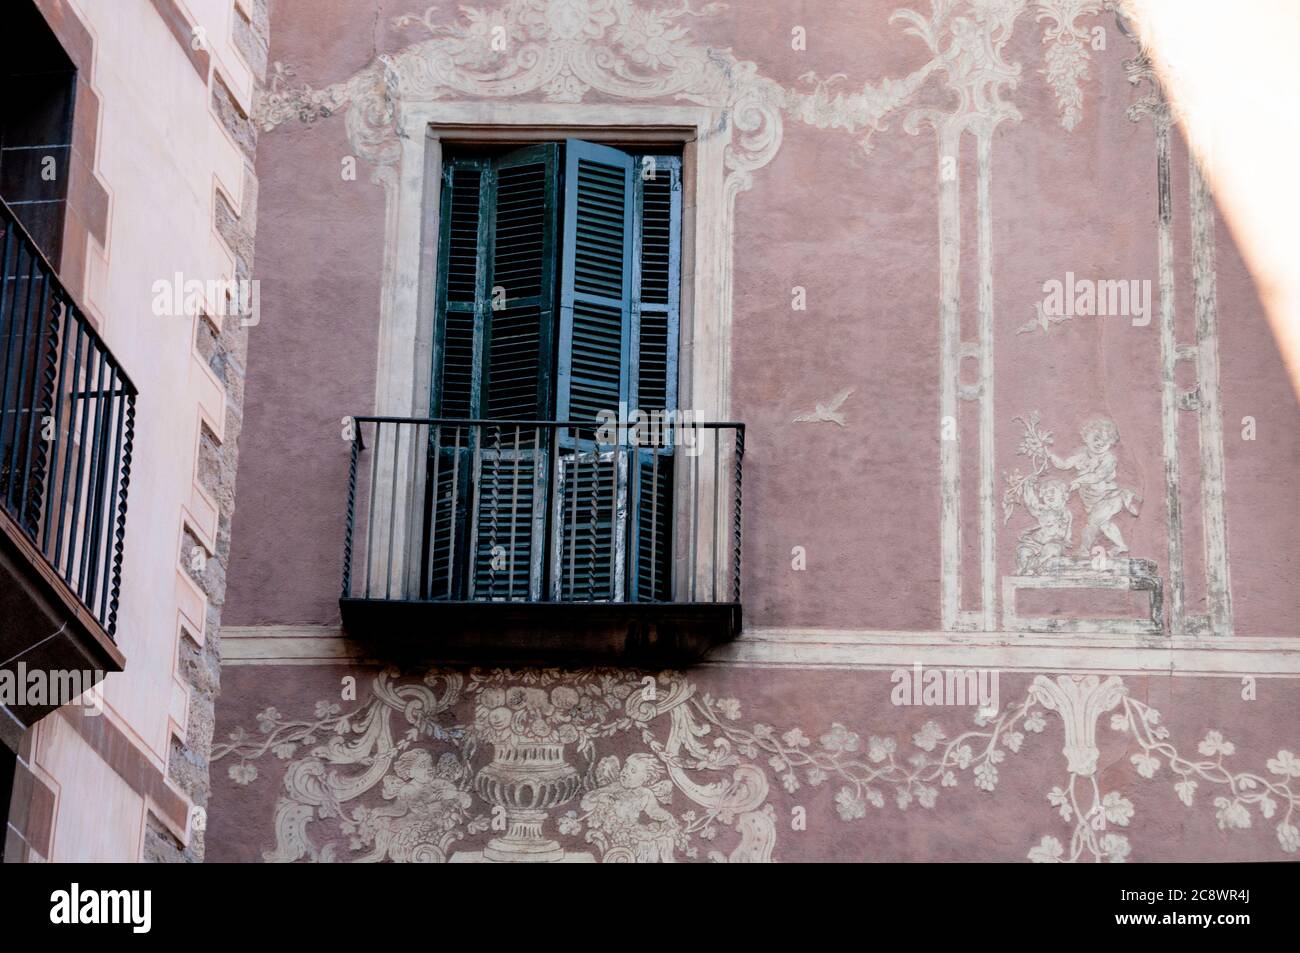 Sgraffito, a baroque gothic style of wall decor scratched into plaster in the Bari Gothic neighborhood of Barcelona, Spain. Stock Photo